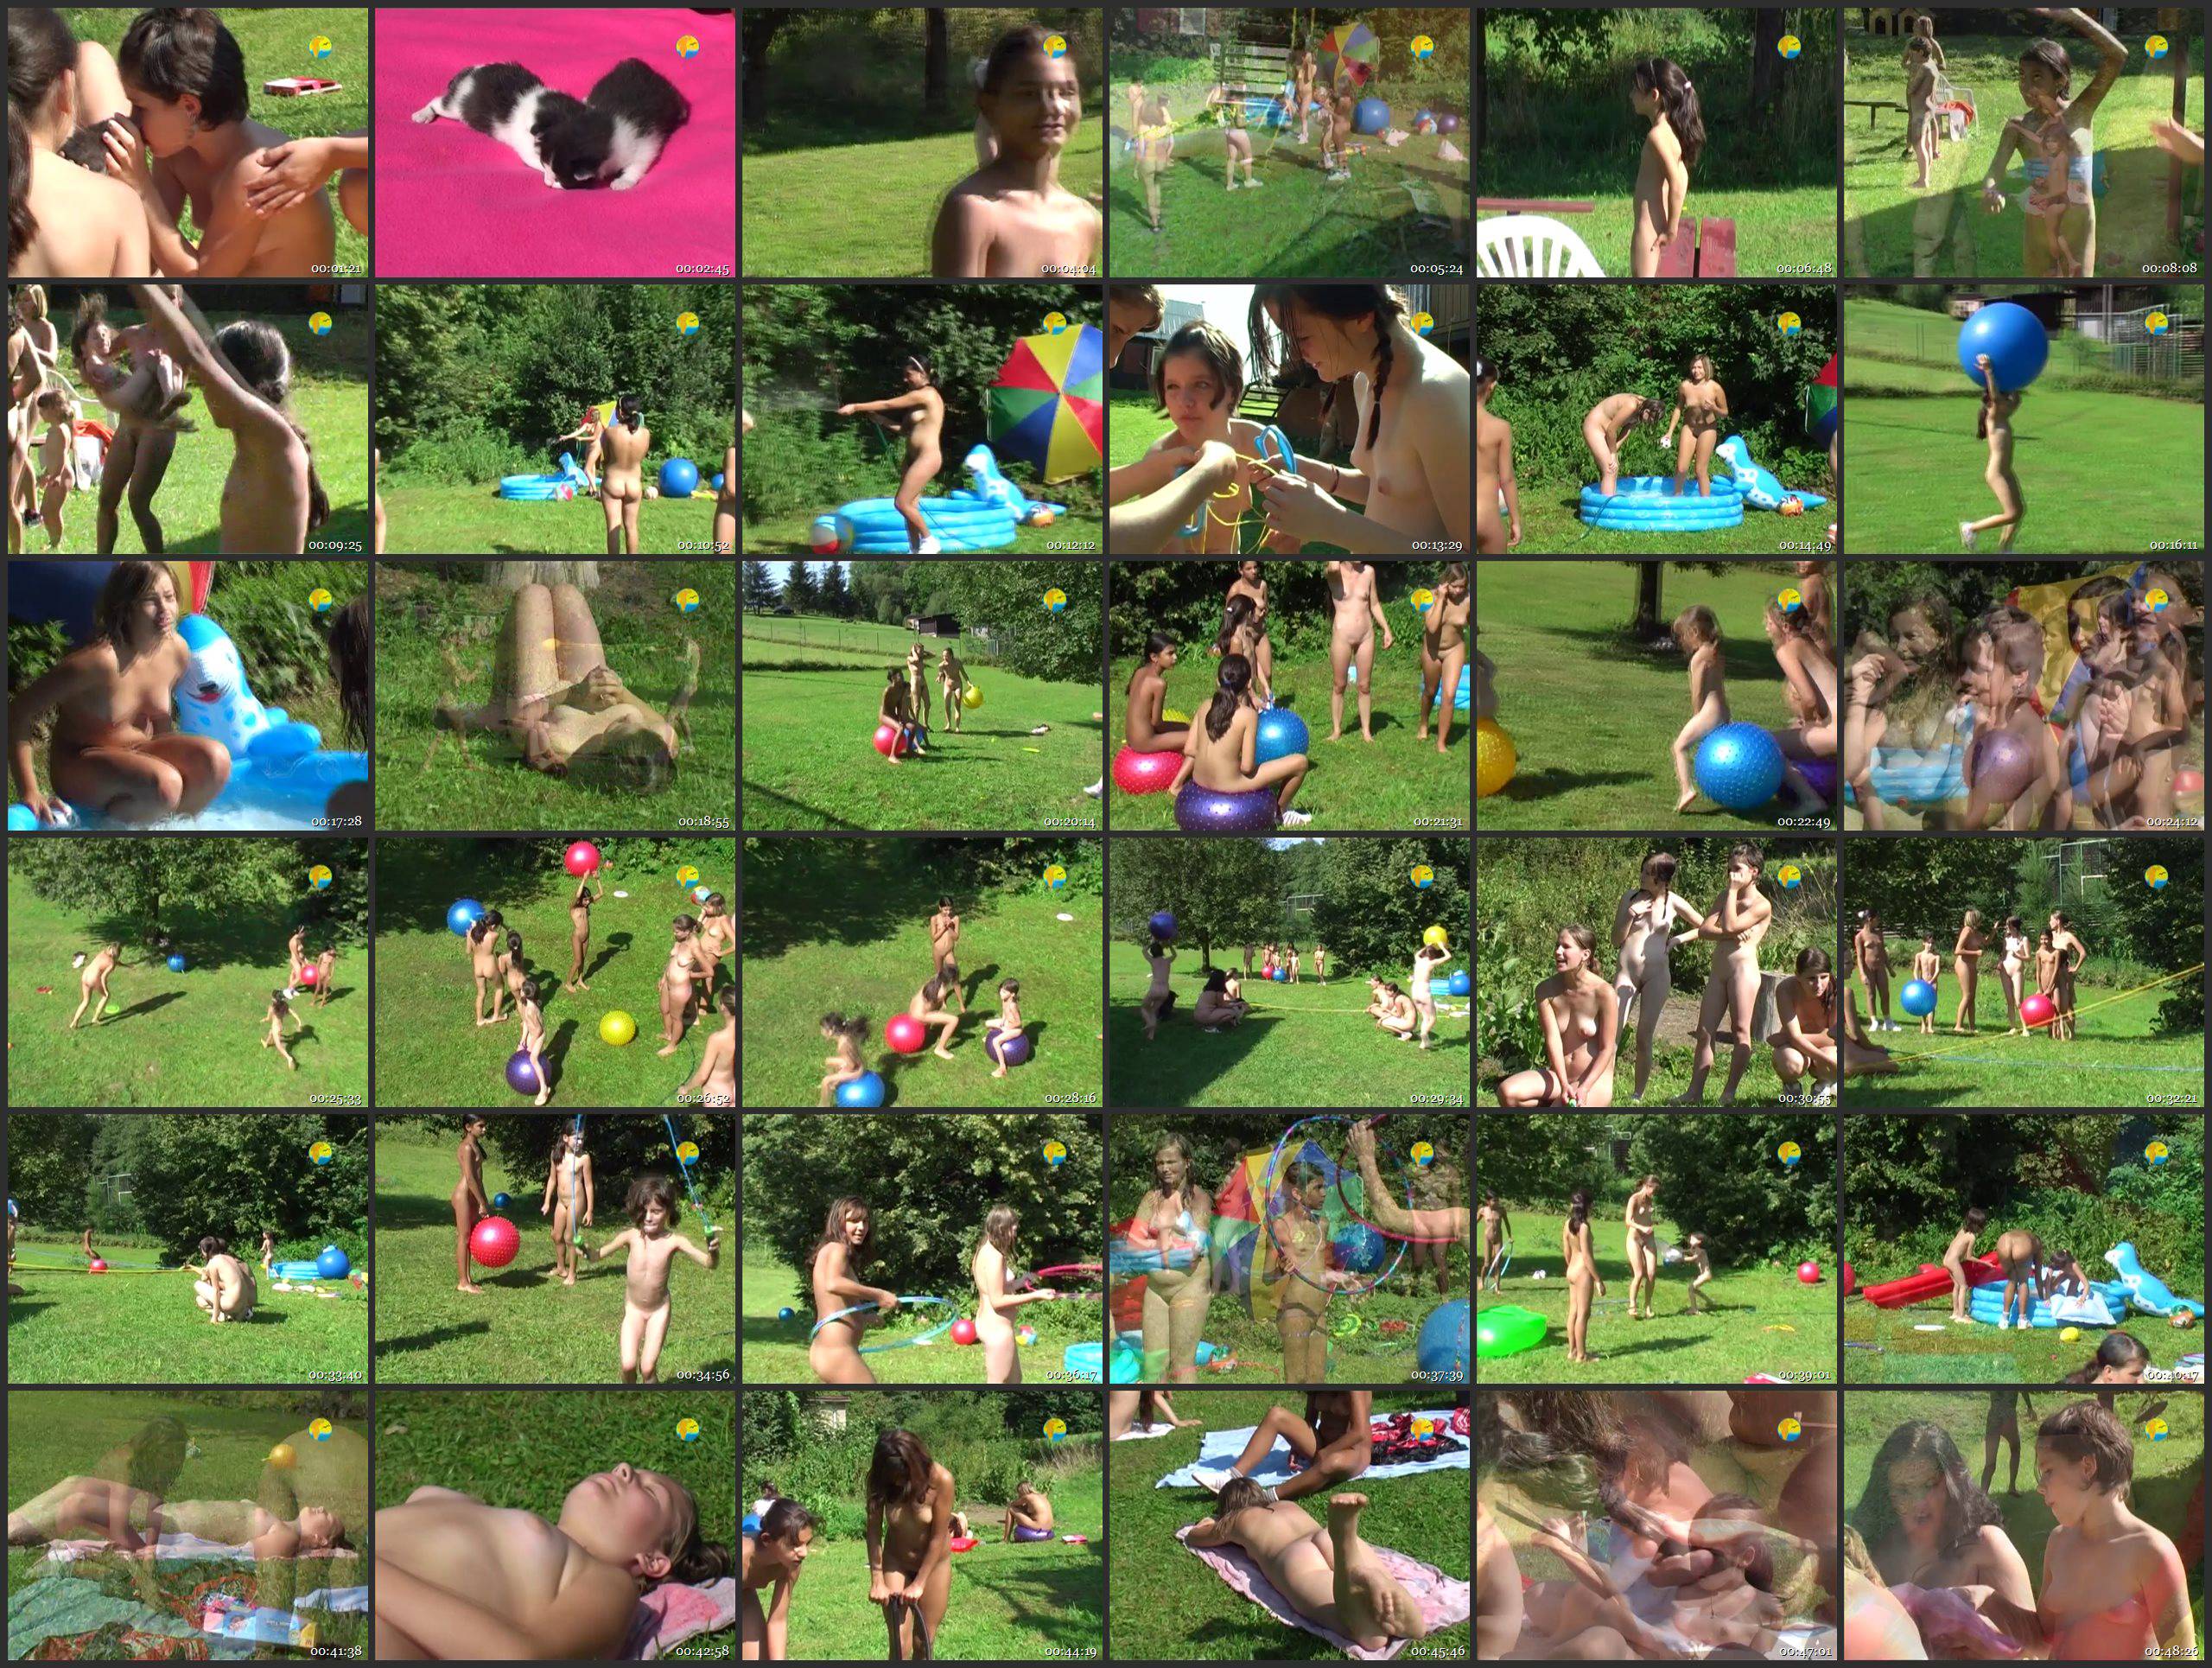 Naturist Freedom Videos-Games at a Meadow - Thumbnails